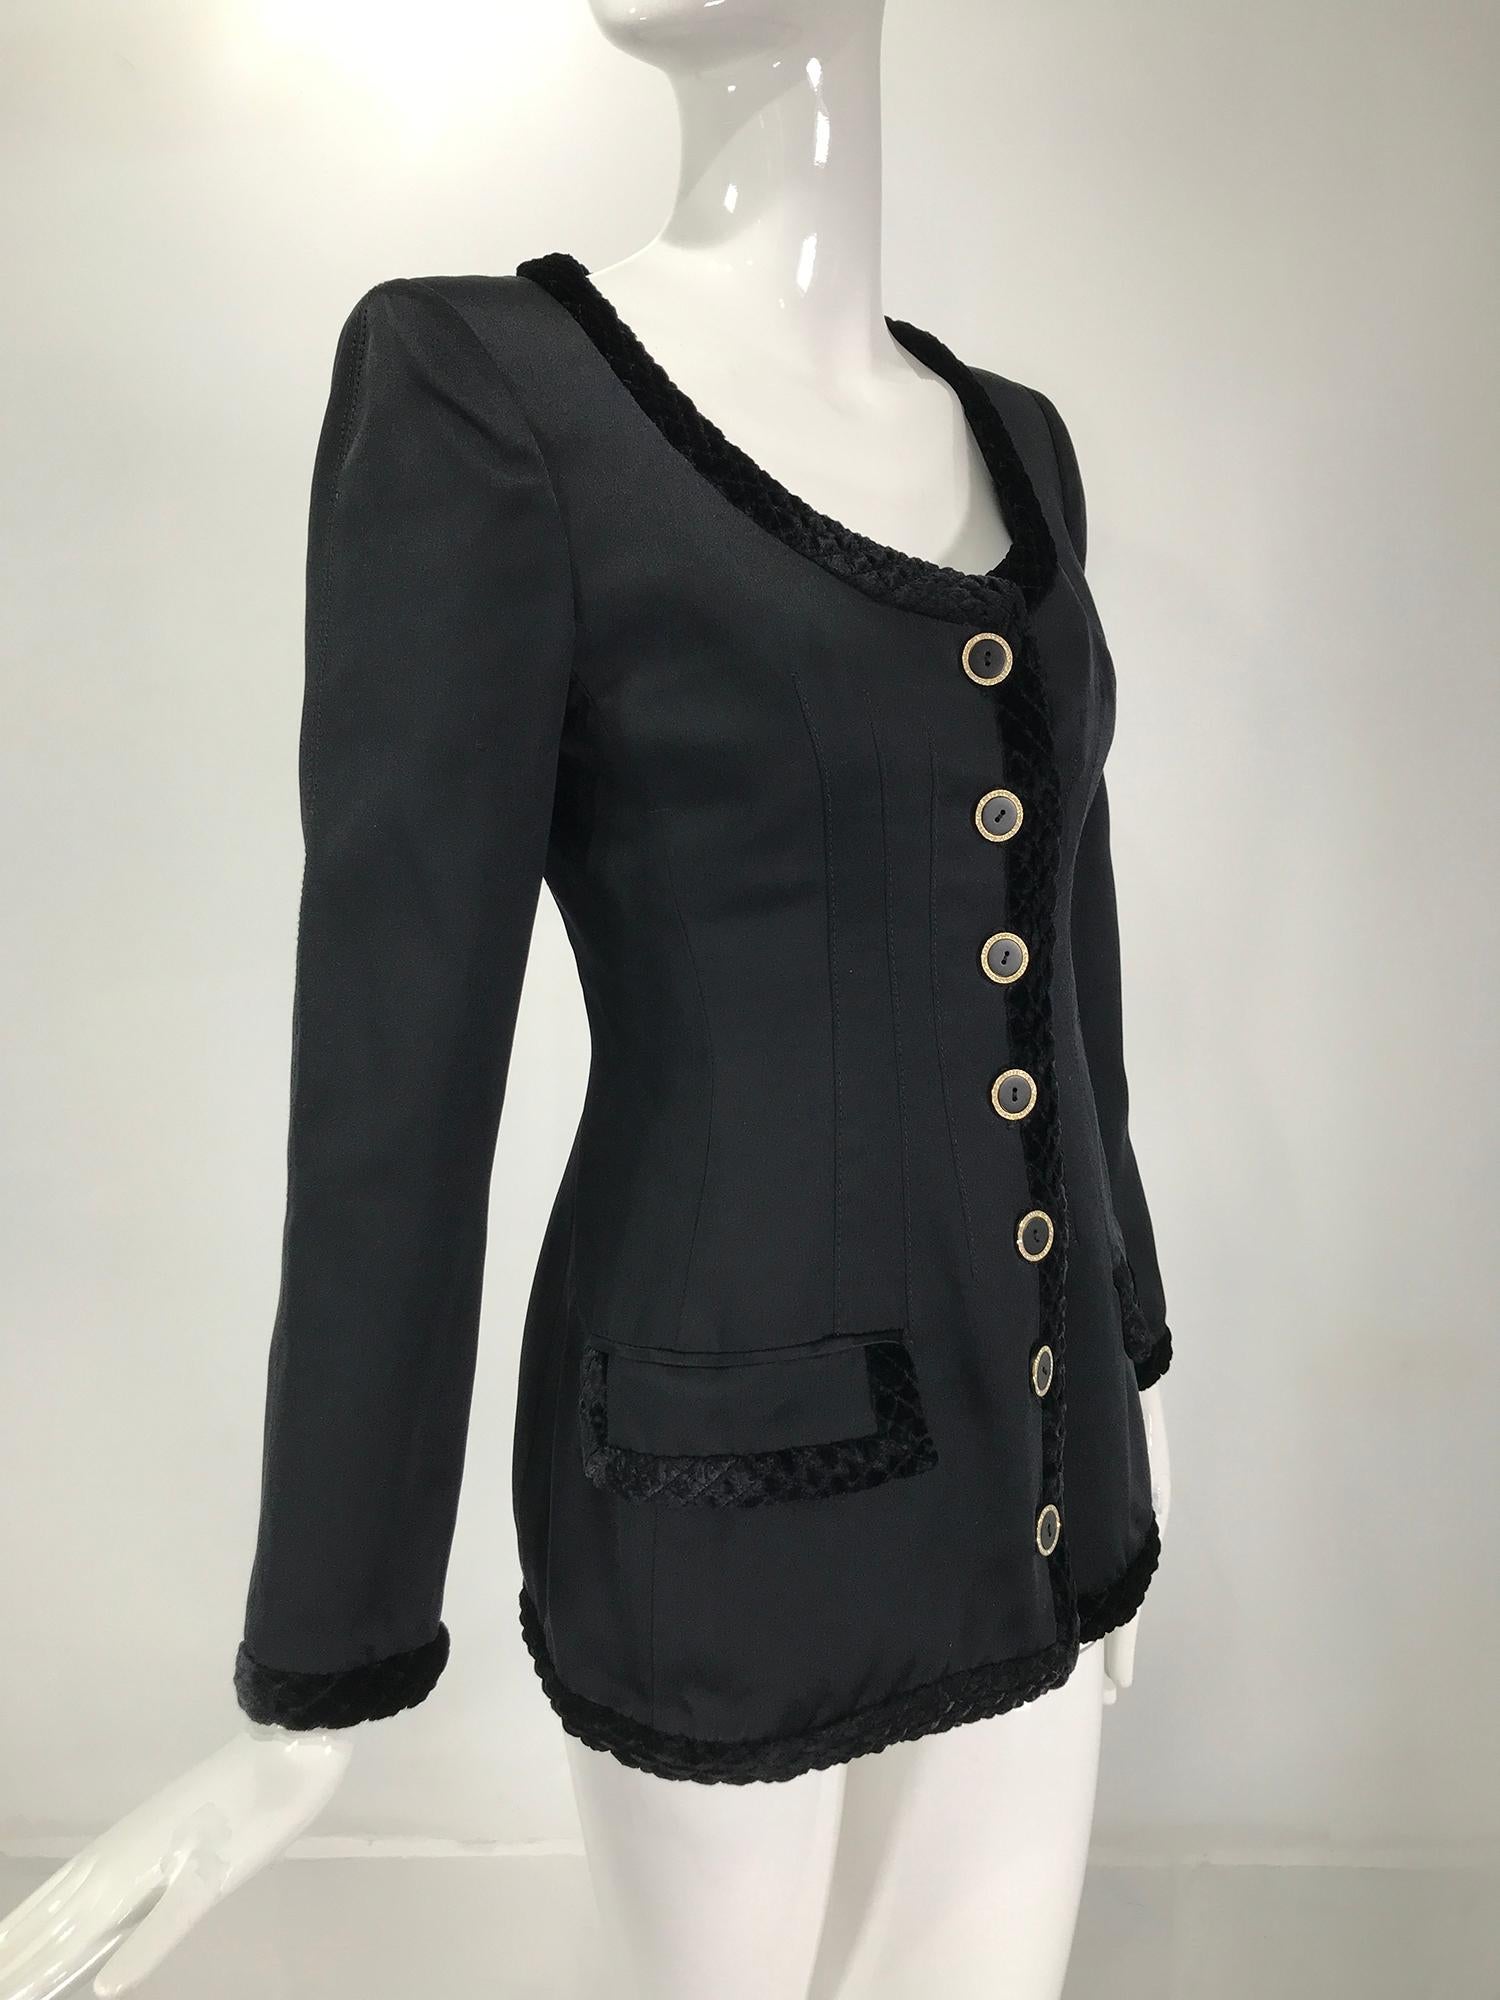 Valentino Black Silk Fitted Jewel Button Evening Jacket 1990s For Sale 6